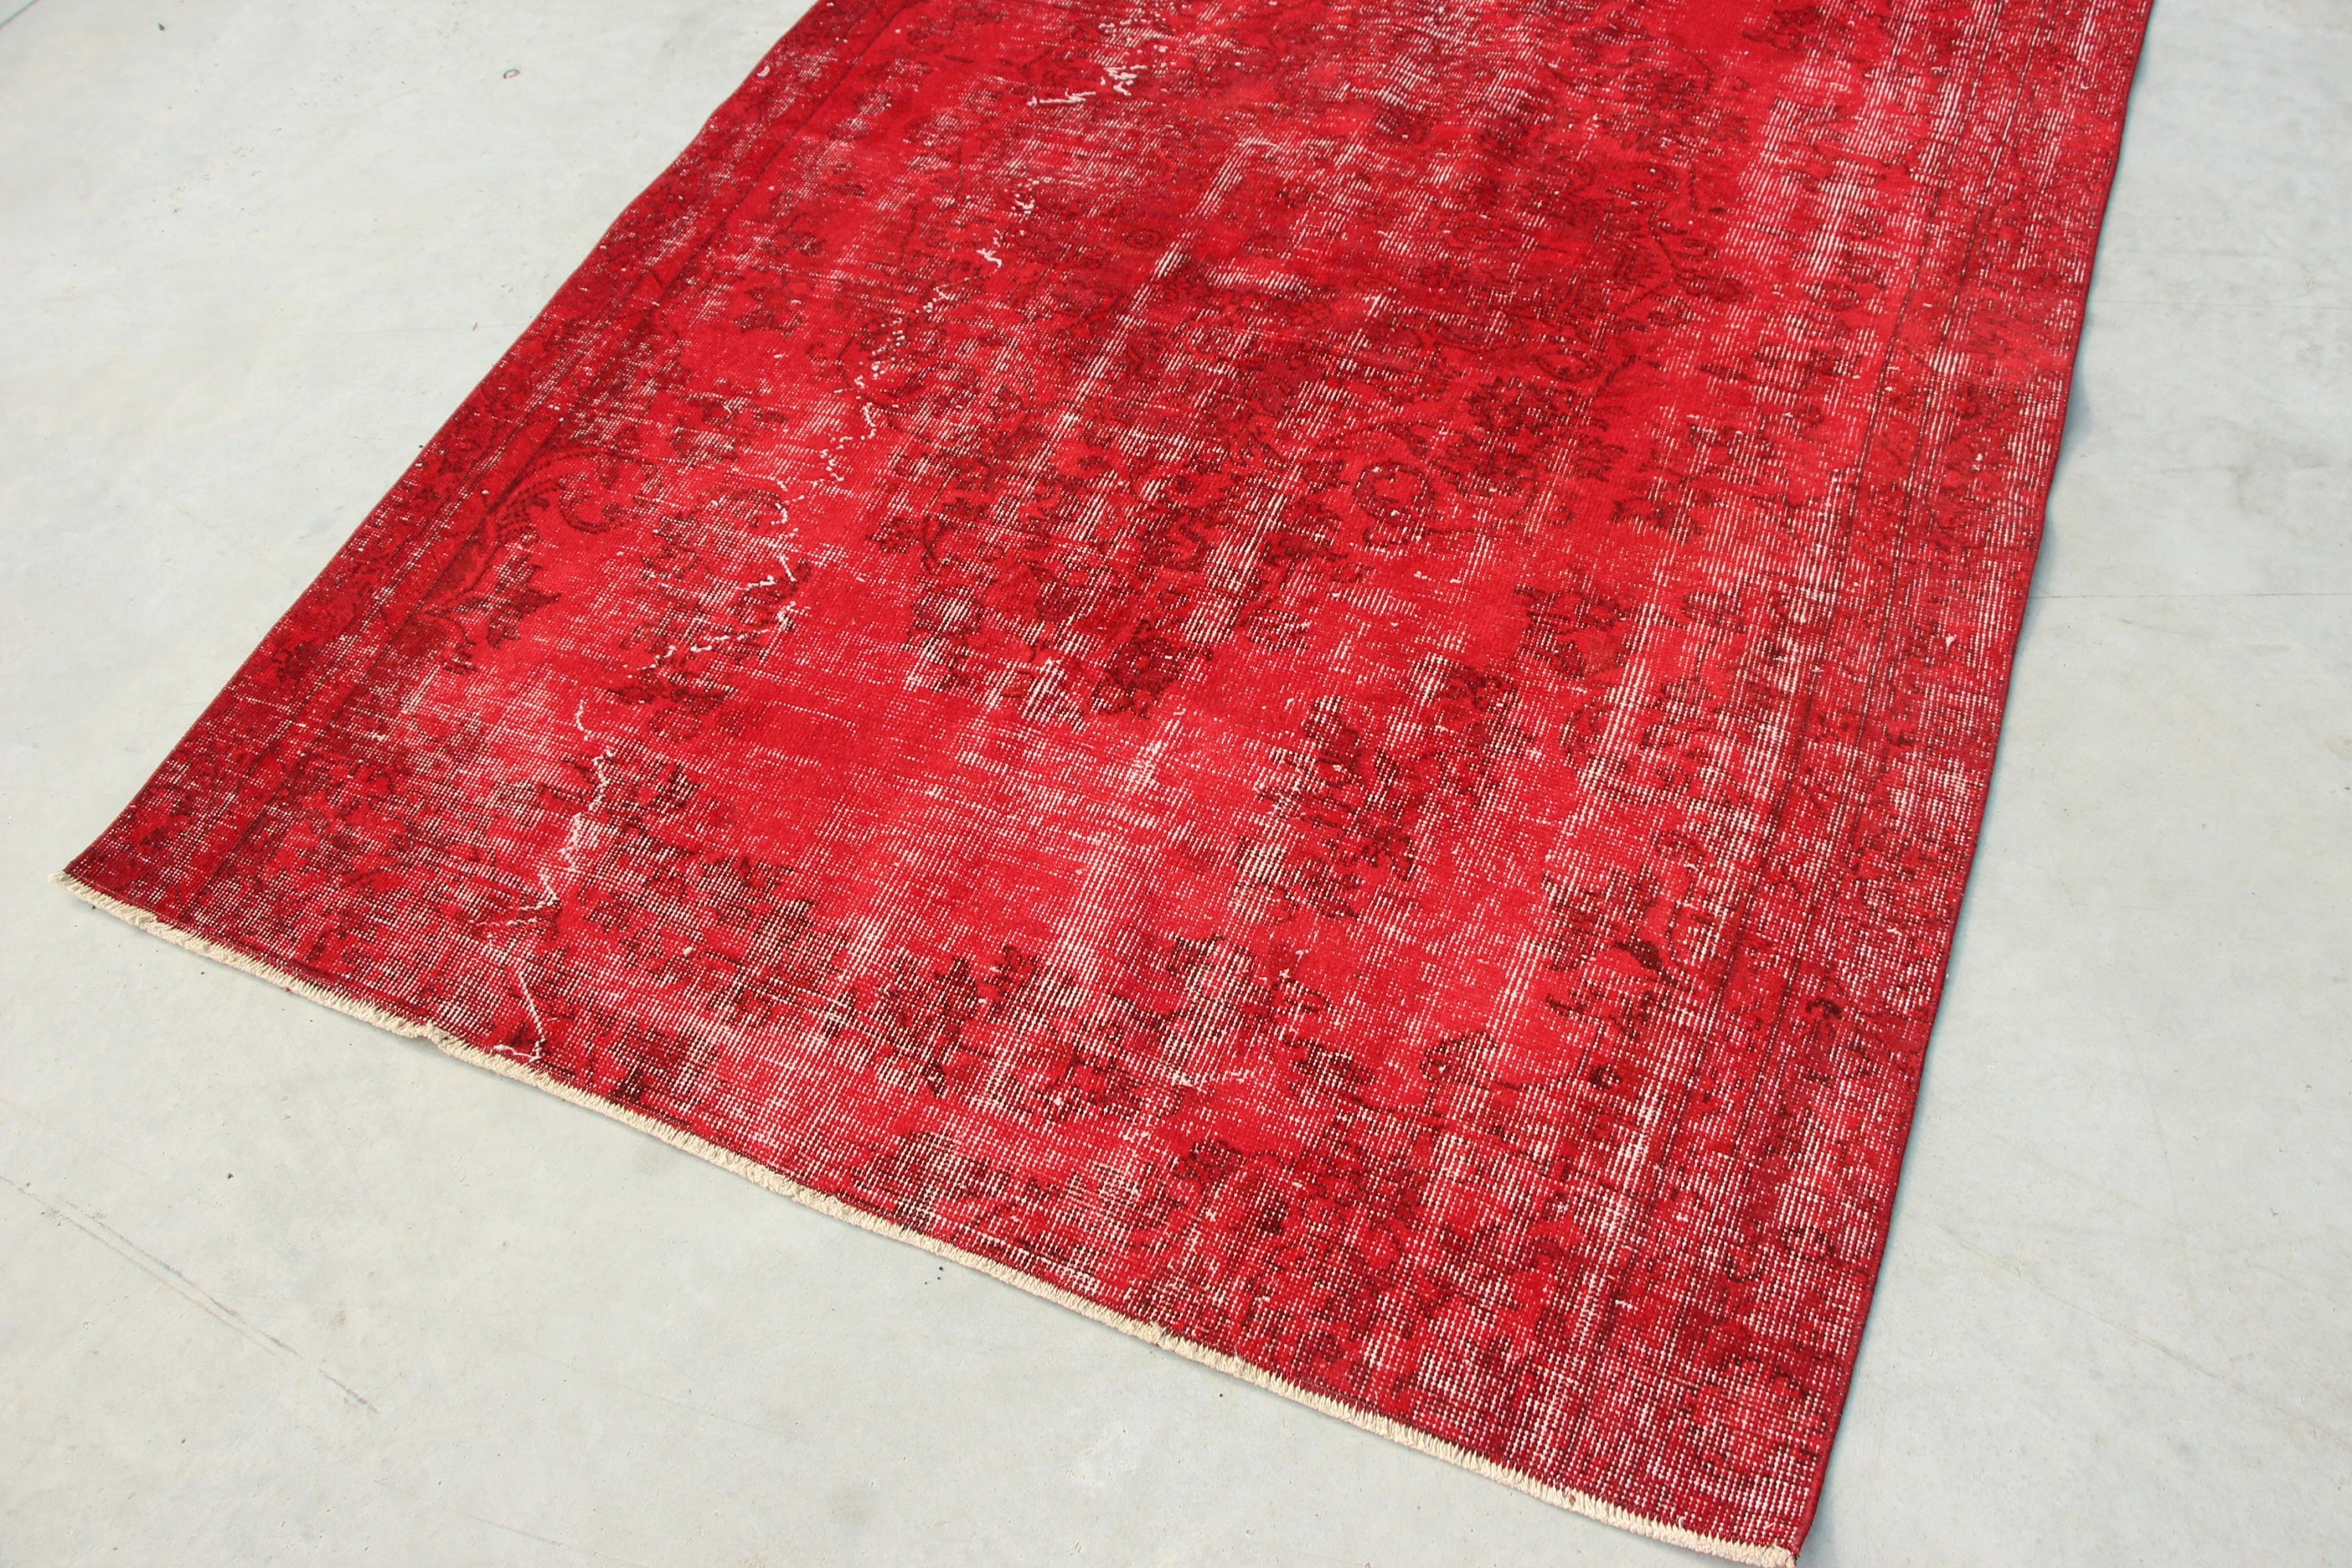 Vintage Decor Rugs, Bedroom Rug, Antique Rug, Rugs for Area, Home Decor Rugs, Turkish Rug, 4.7x7 ft Area Rugs, Vintage Rug, Red Antique Rug